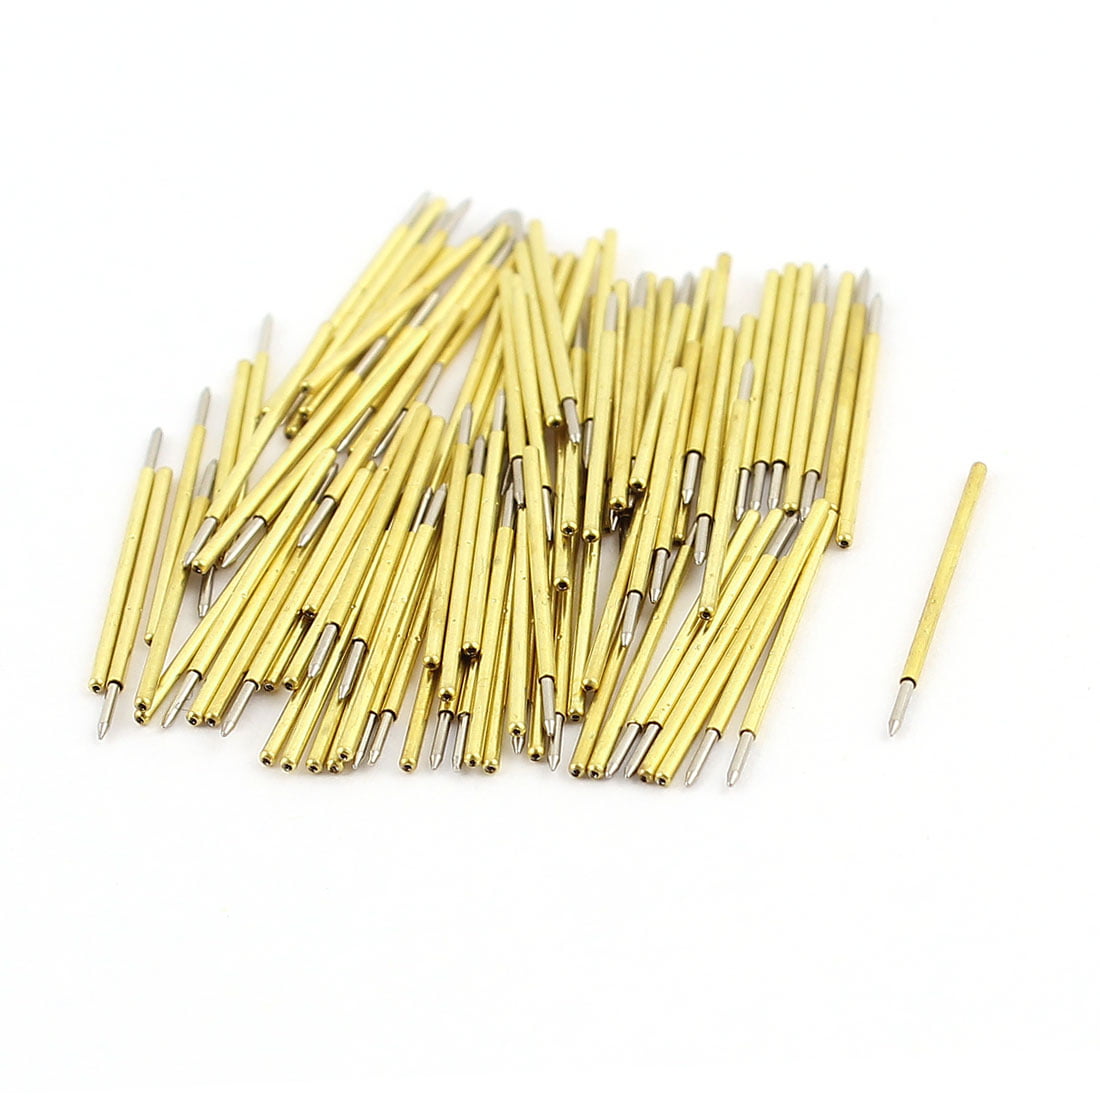 100 Pieces P50-A2 Dia 0.68mm Length 16mm Spring Test Probe Pogo Pin 